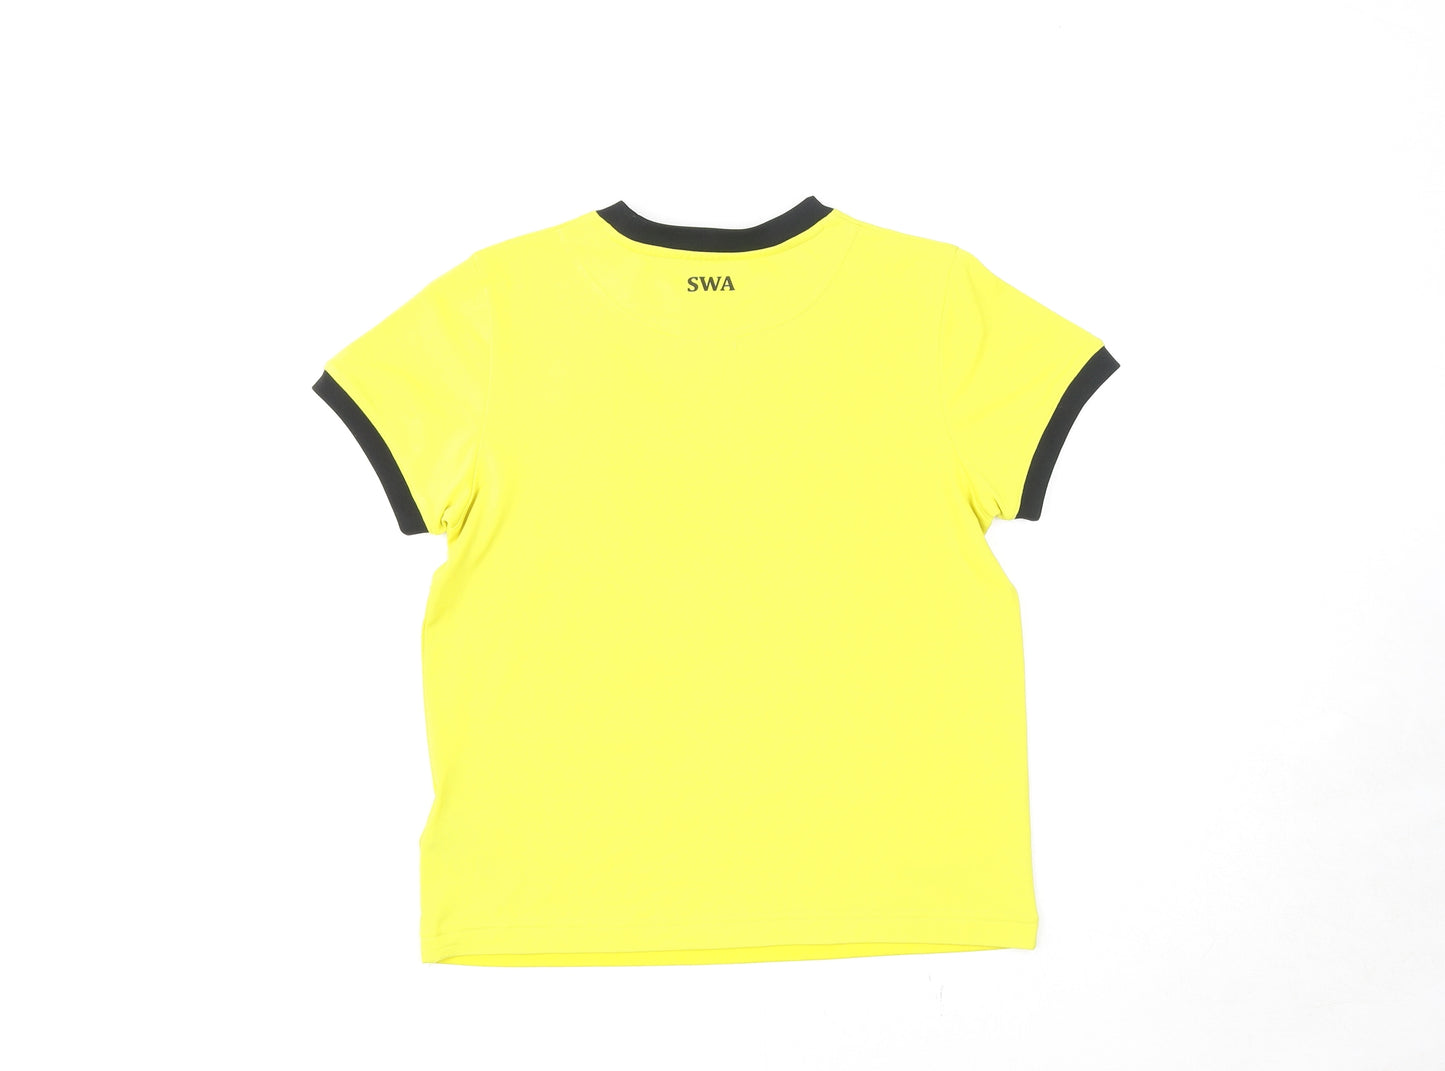 Mills Boys Yellow Polyester Basic T-Shirt Size 8-9 Years Round Neck Pullover - Tranmere Rovers F.C.